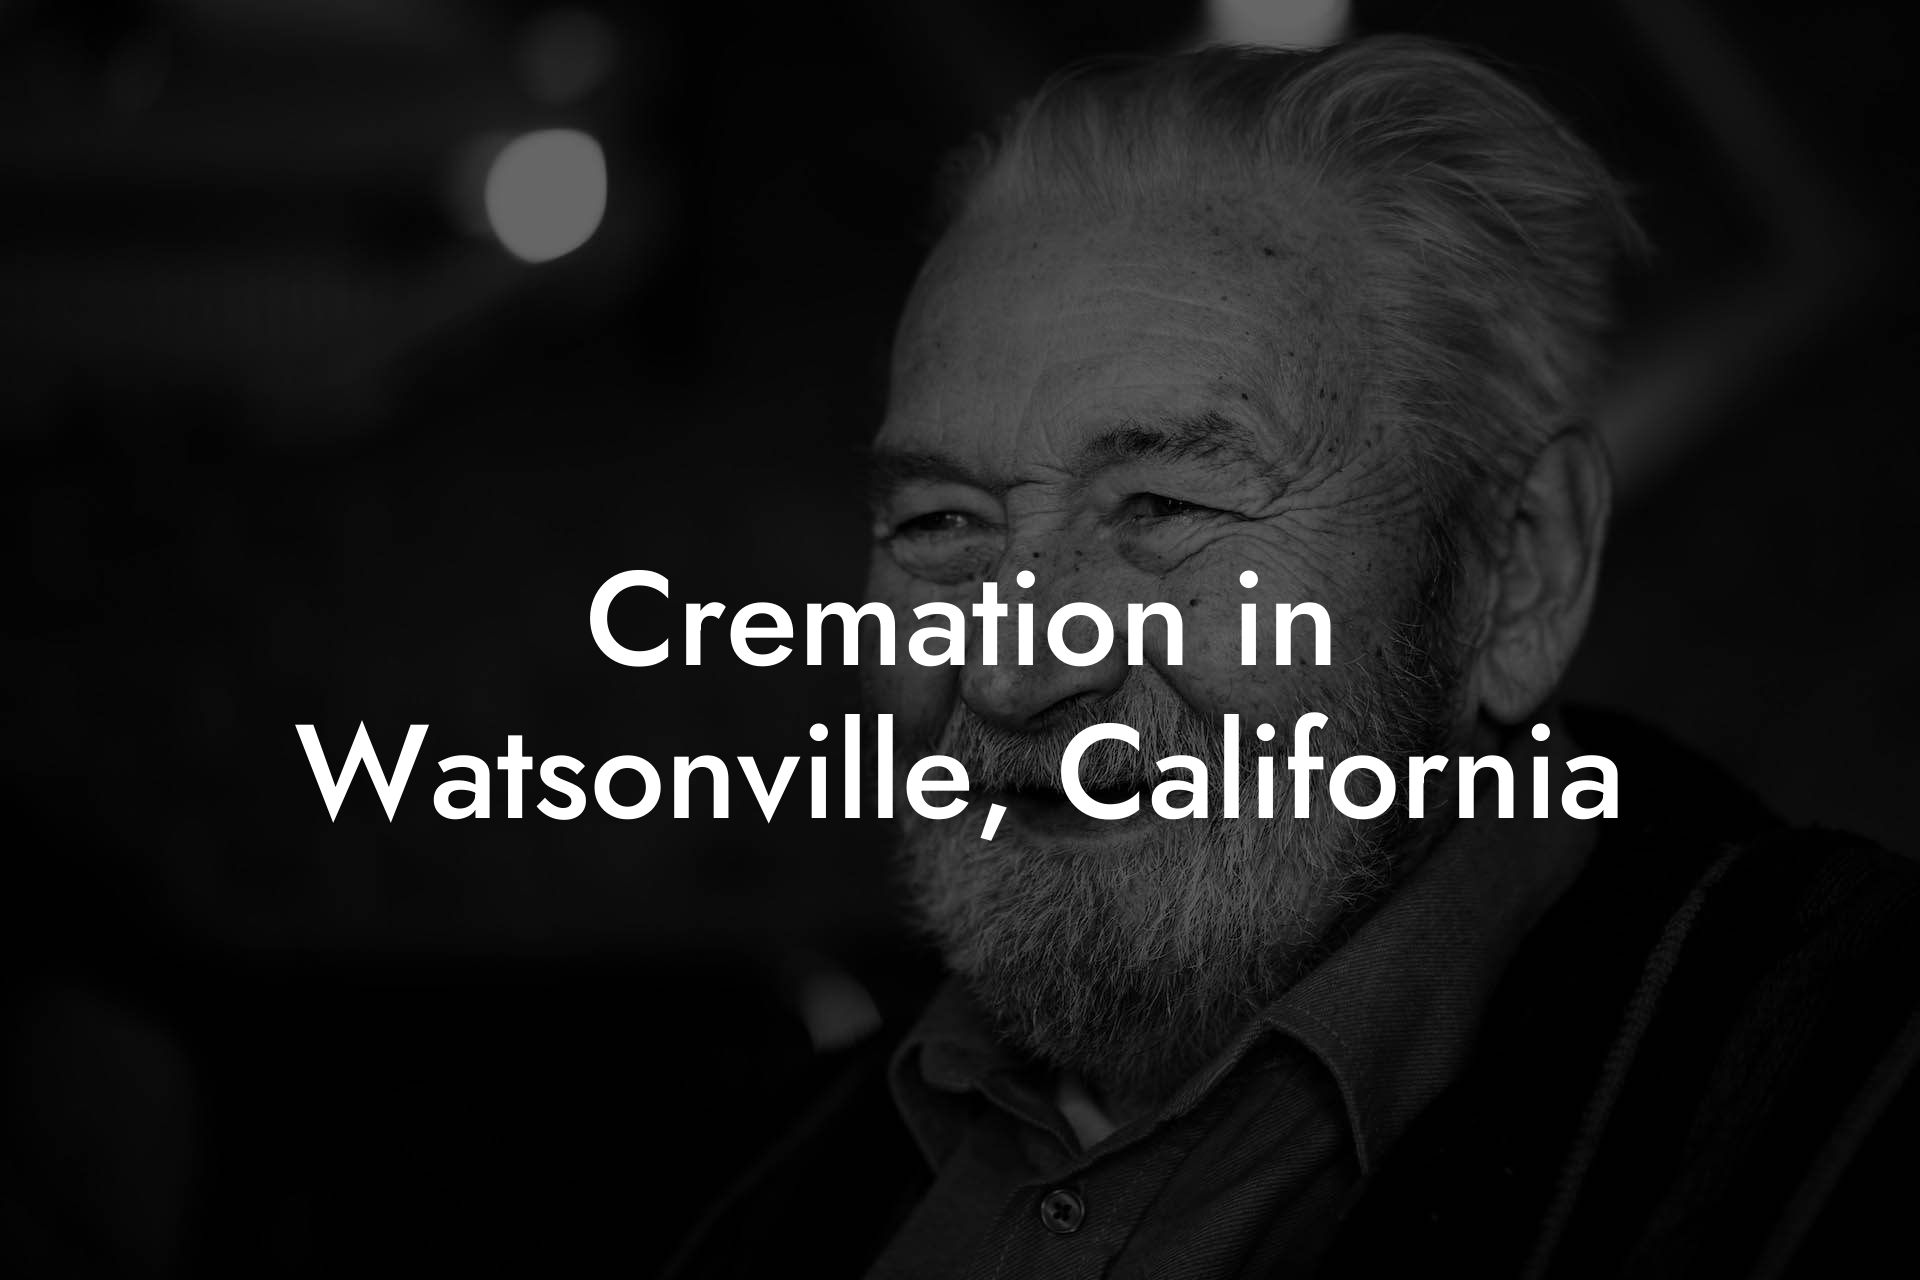 Cremation in Watsonville, California